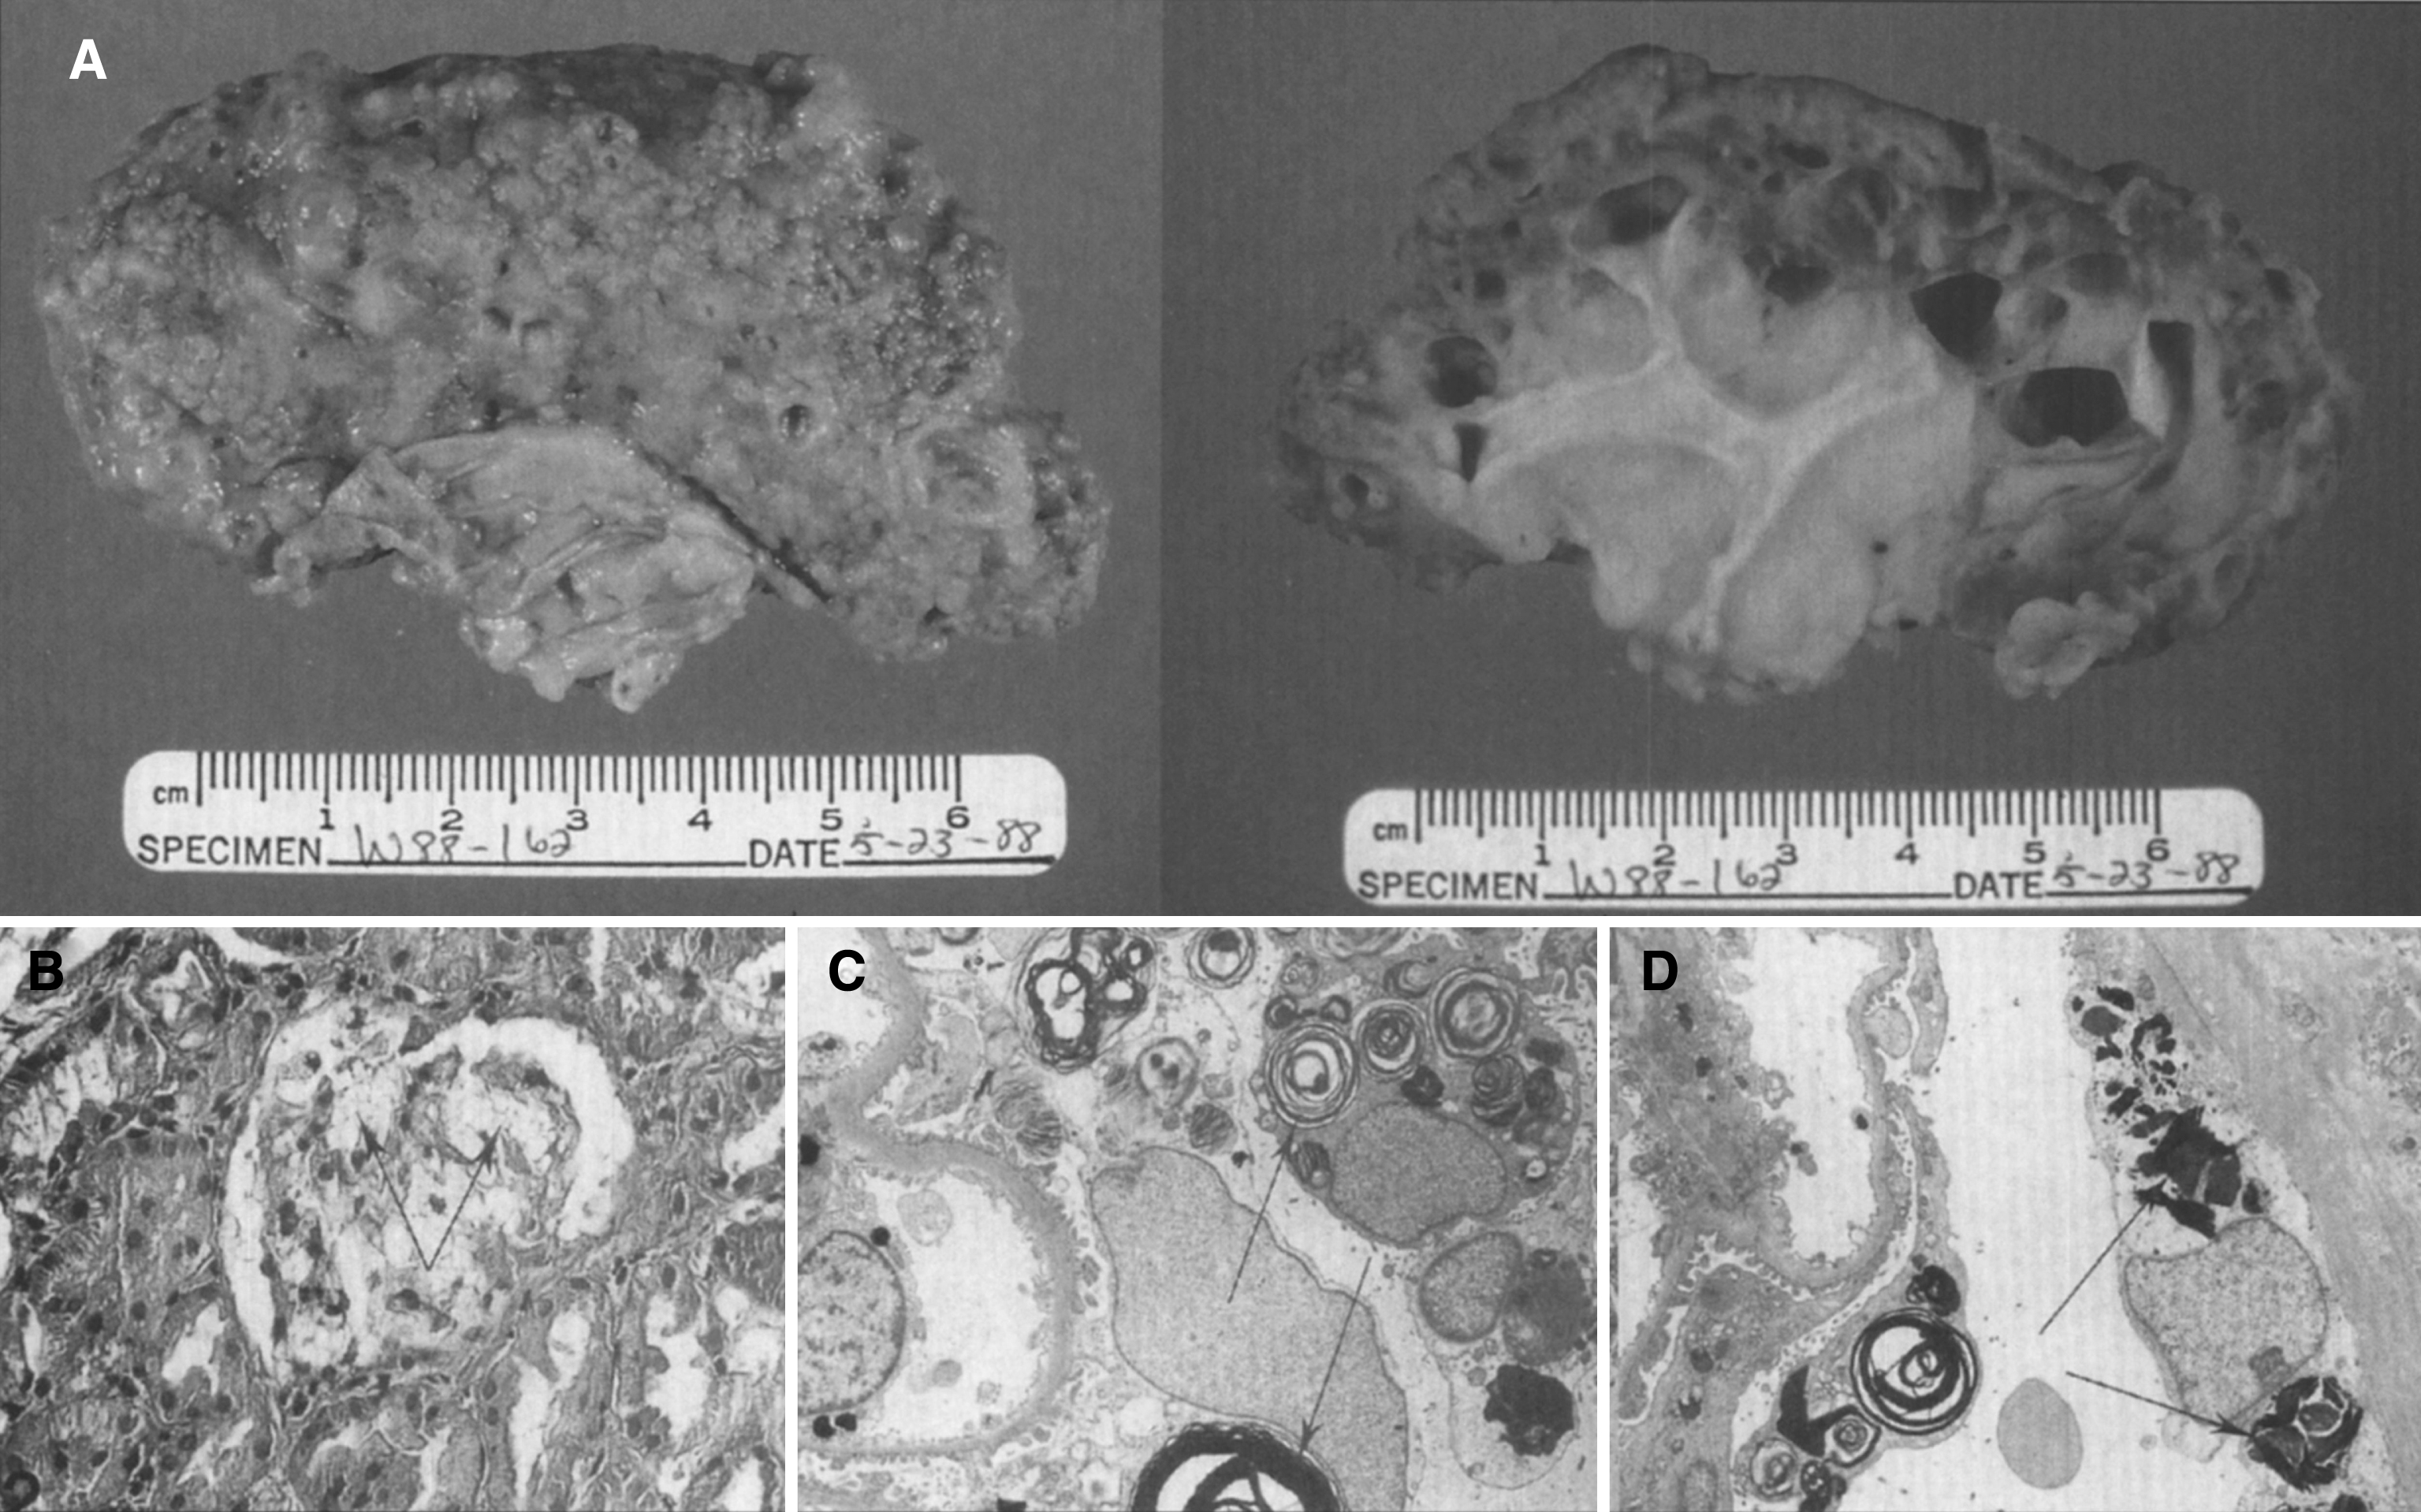 Fabry disease: kidney. (A) Gross appearance of end-stage disease with scarring and cyst formation. External view (left), cut surface (right). (B) Microscopic section of kidney glomerulus. Foamy glomerular epithelial cells are present. (C) Electron micrograph of kidney. Glomerular epithelial cells contain myelin-like figures. (D) Glomerular parietal epithelial cells show pleomorphic lipid inclusions.